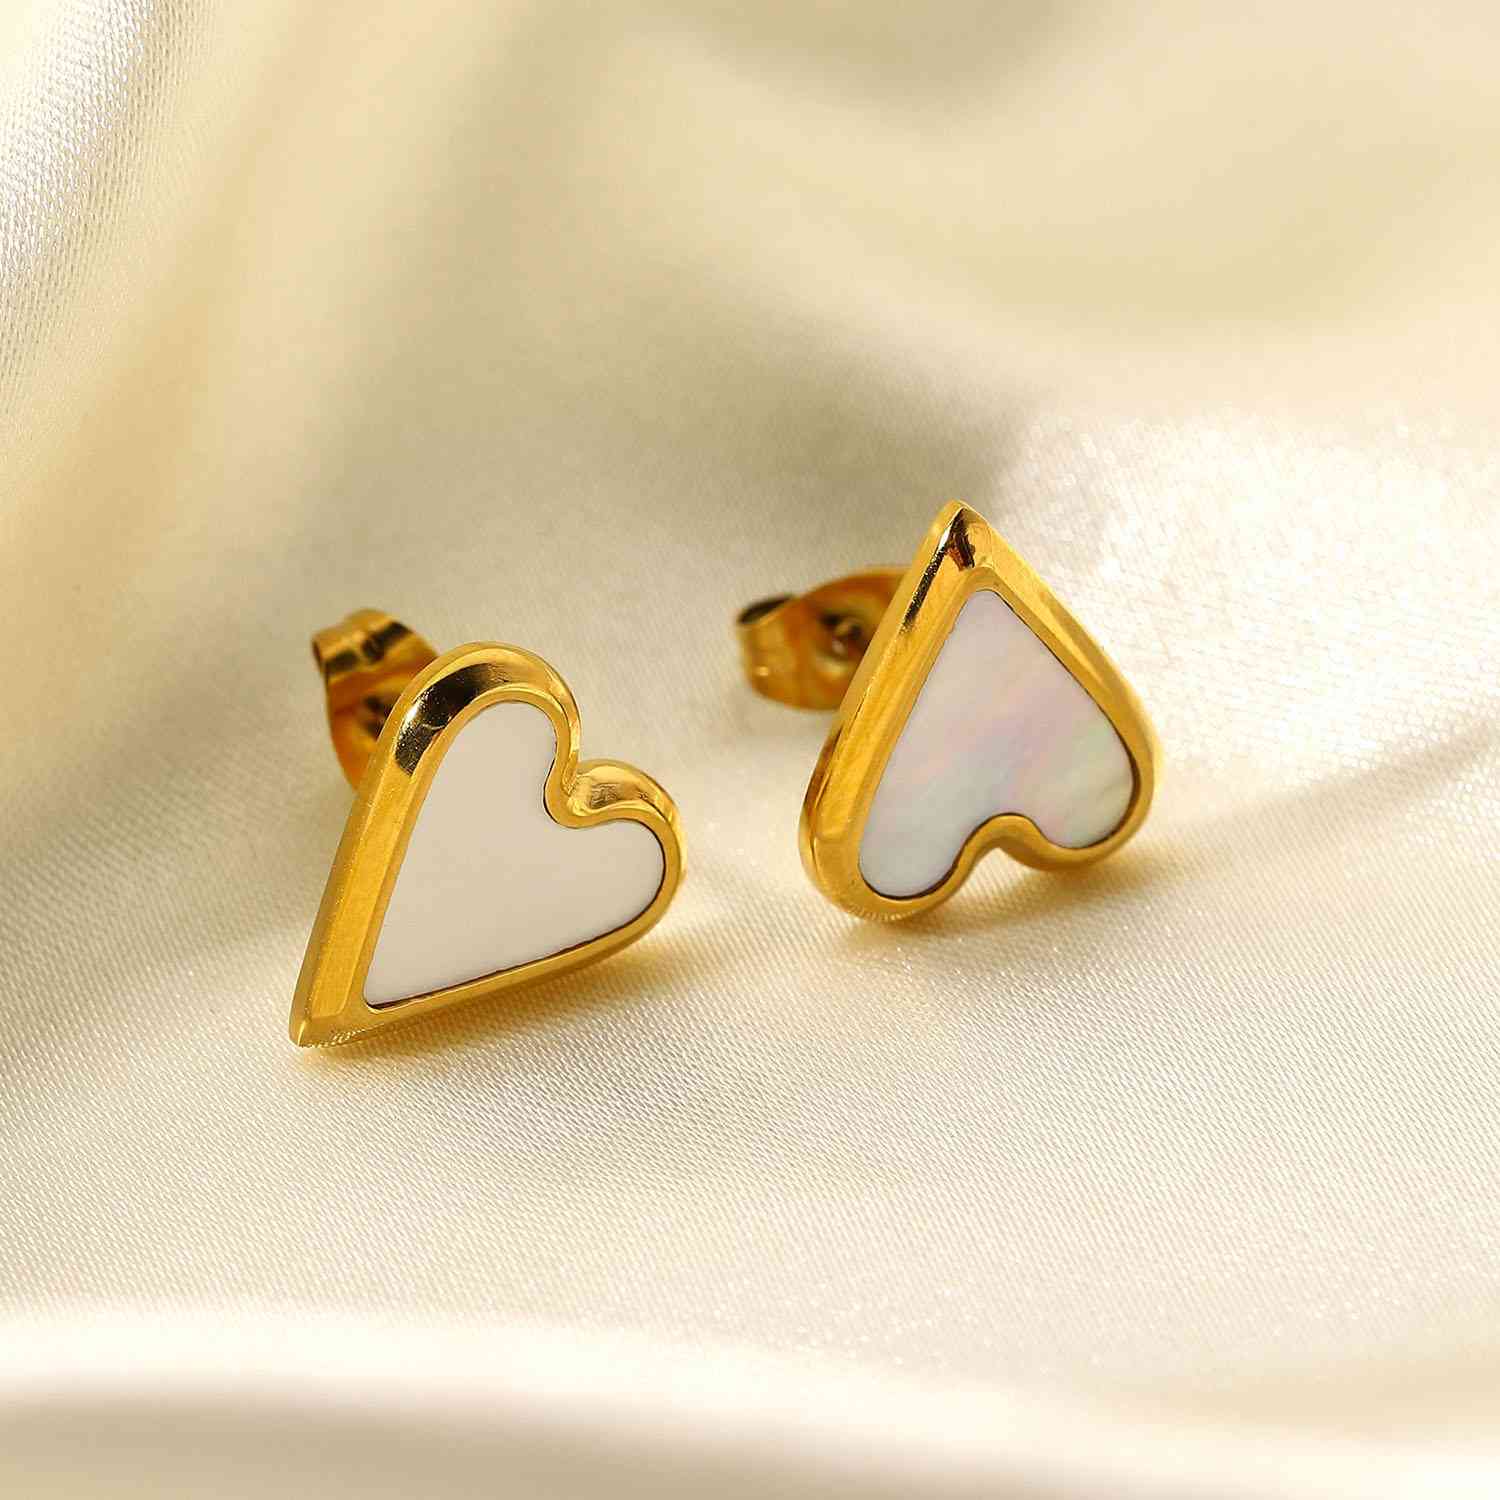 Heart Stainless Steel Stud Earrings - Kawaii Stop - Affectionate Gift, Durable and Luxurious, Elegant Earrings, Everyday Elegance, Fashion Accessories, Fashion Forward, Gold Plated, Heart Stud Earrings, High-Quality Jewelry, Jack&Din, Love Symbol, Perfect for All Occasions, Radiant Beauty, Romantic Style, Ship From Overseas, Sophisticated Charm, Stainless Steel Jewelry, Symbol of Love, Timeless Design, Versatile Earrings, Women's Jewelry